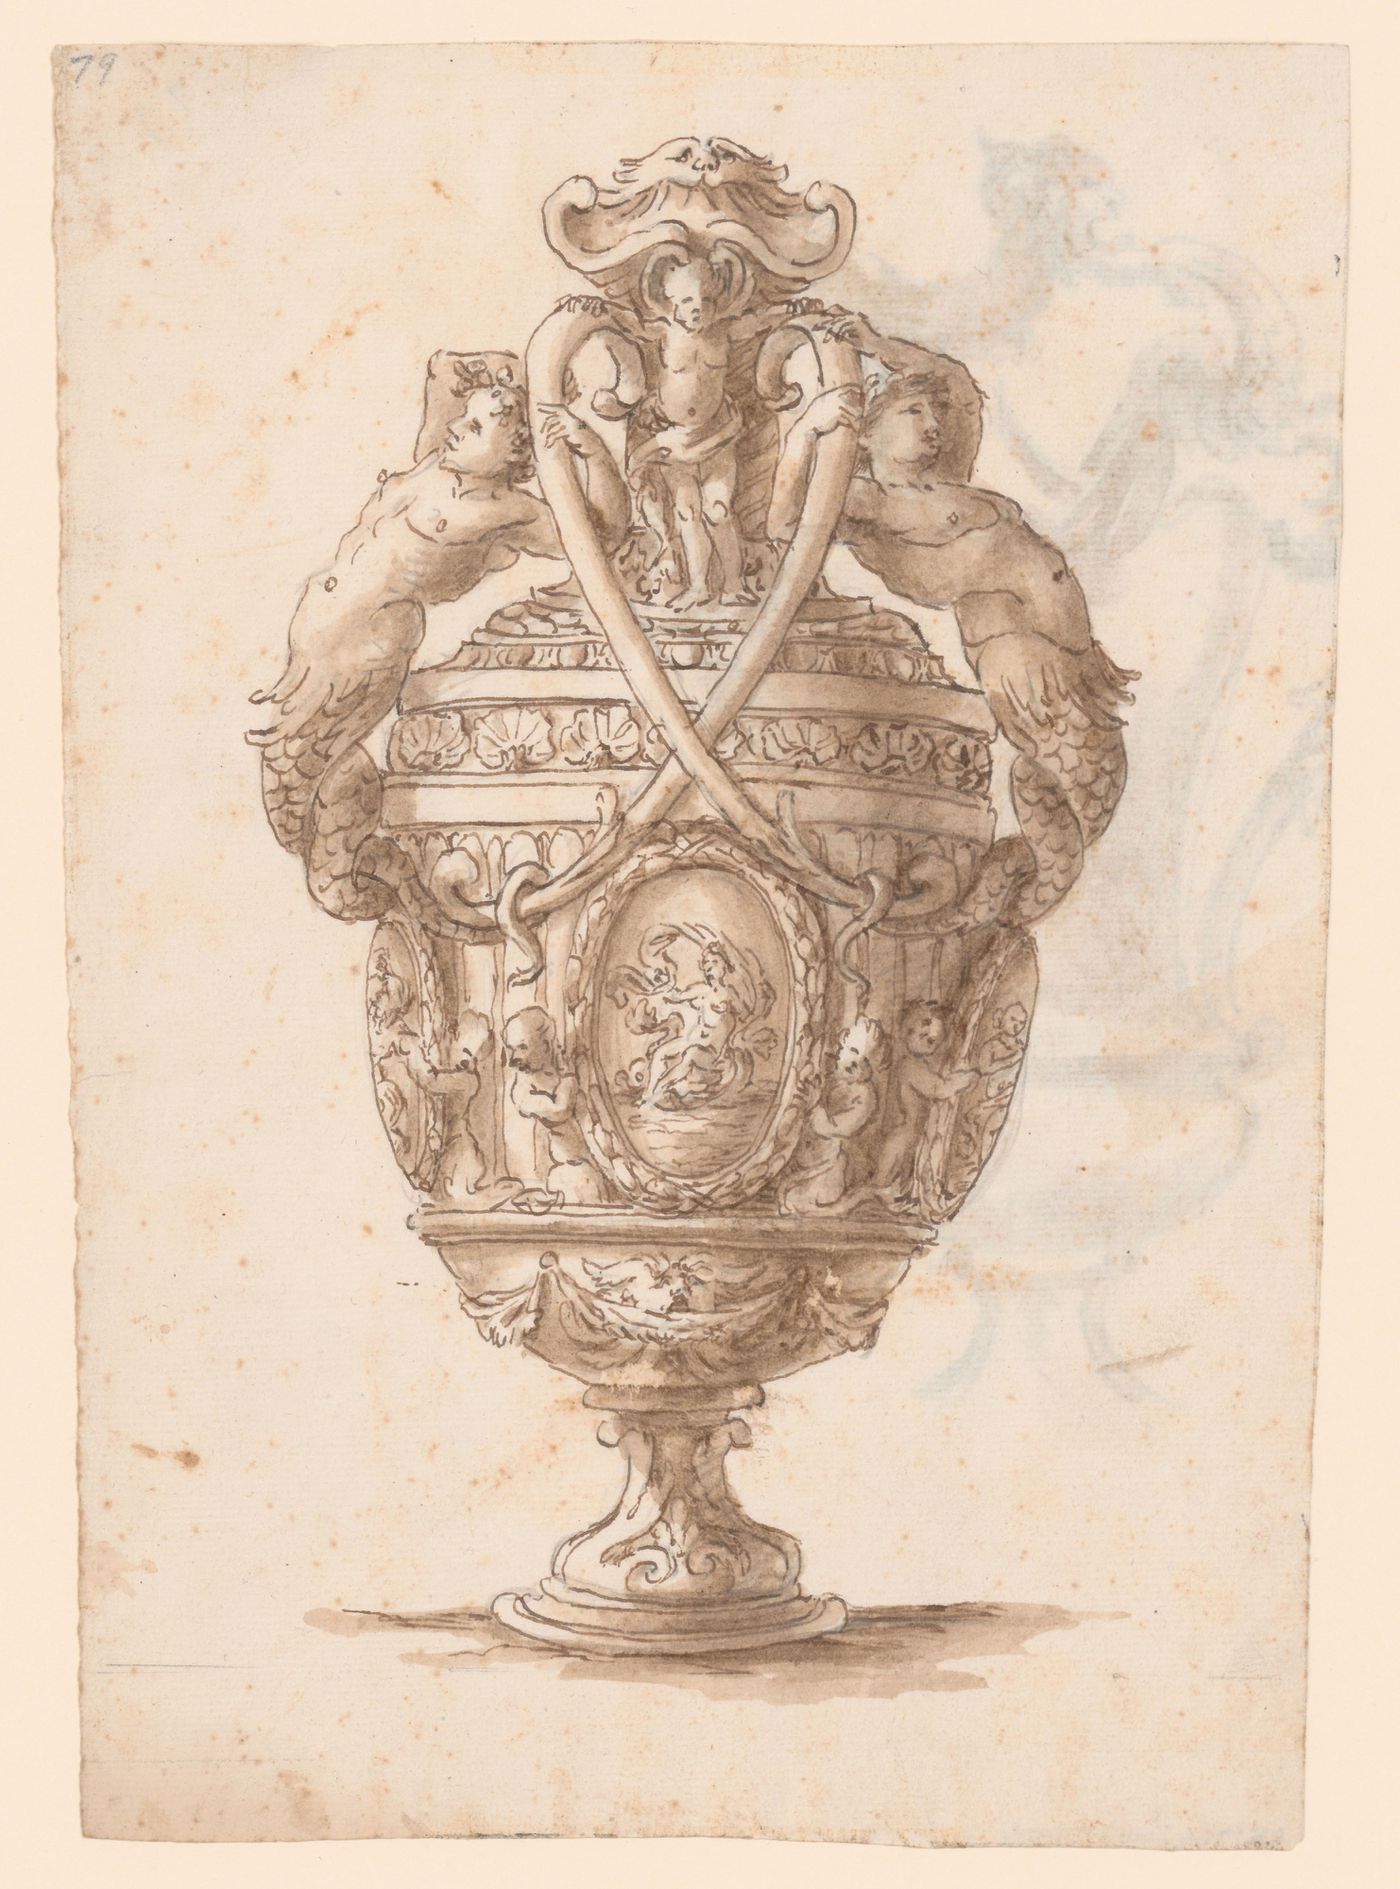 Drawing for an ornamental vase with galatea and tritons; verso: Sketch for an ornamental vase